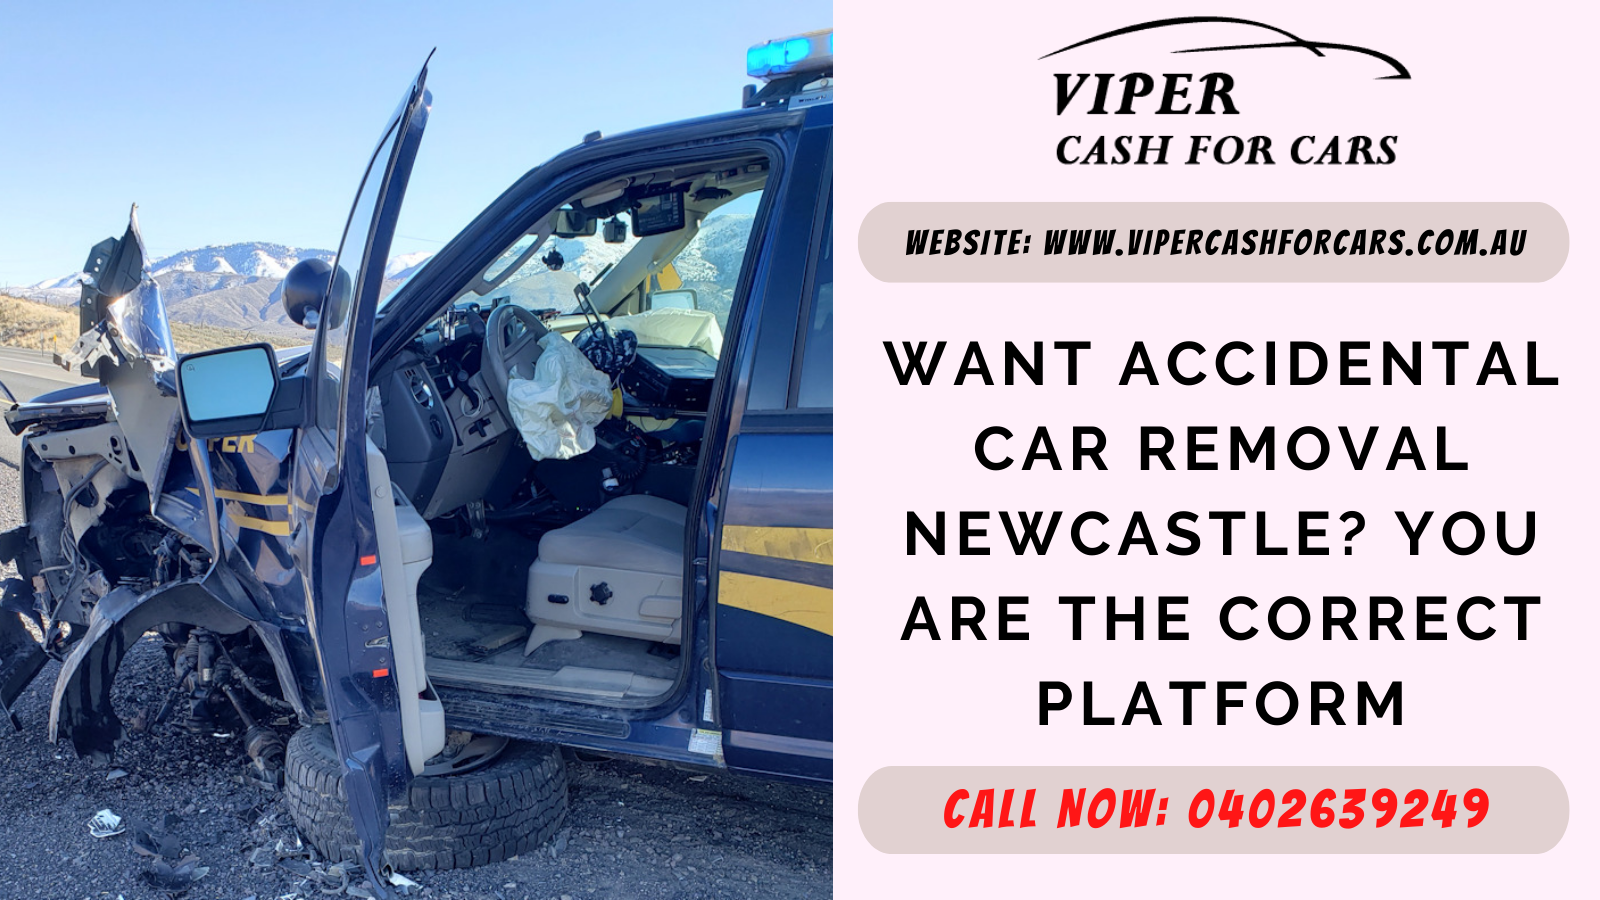 Want Accidental Car Removal Newcastle? You Are The Correct Platform